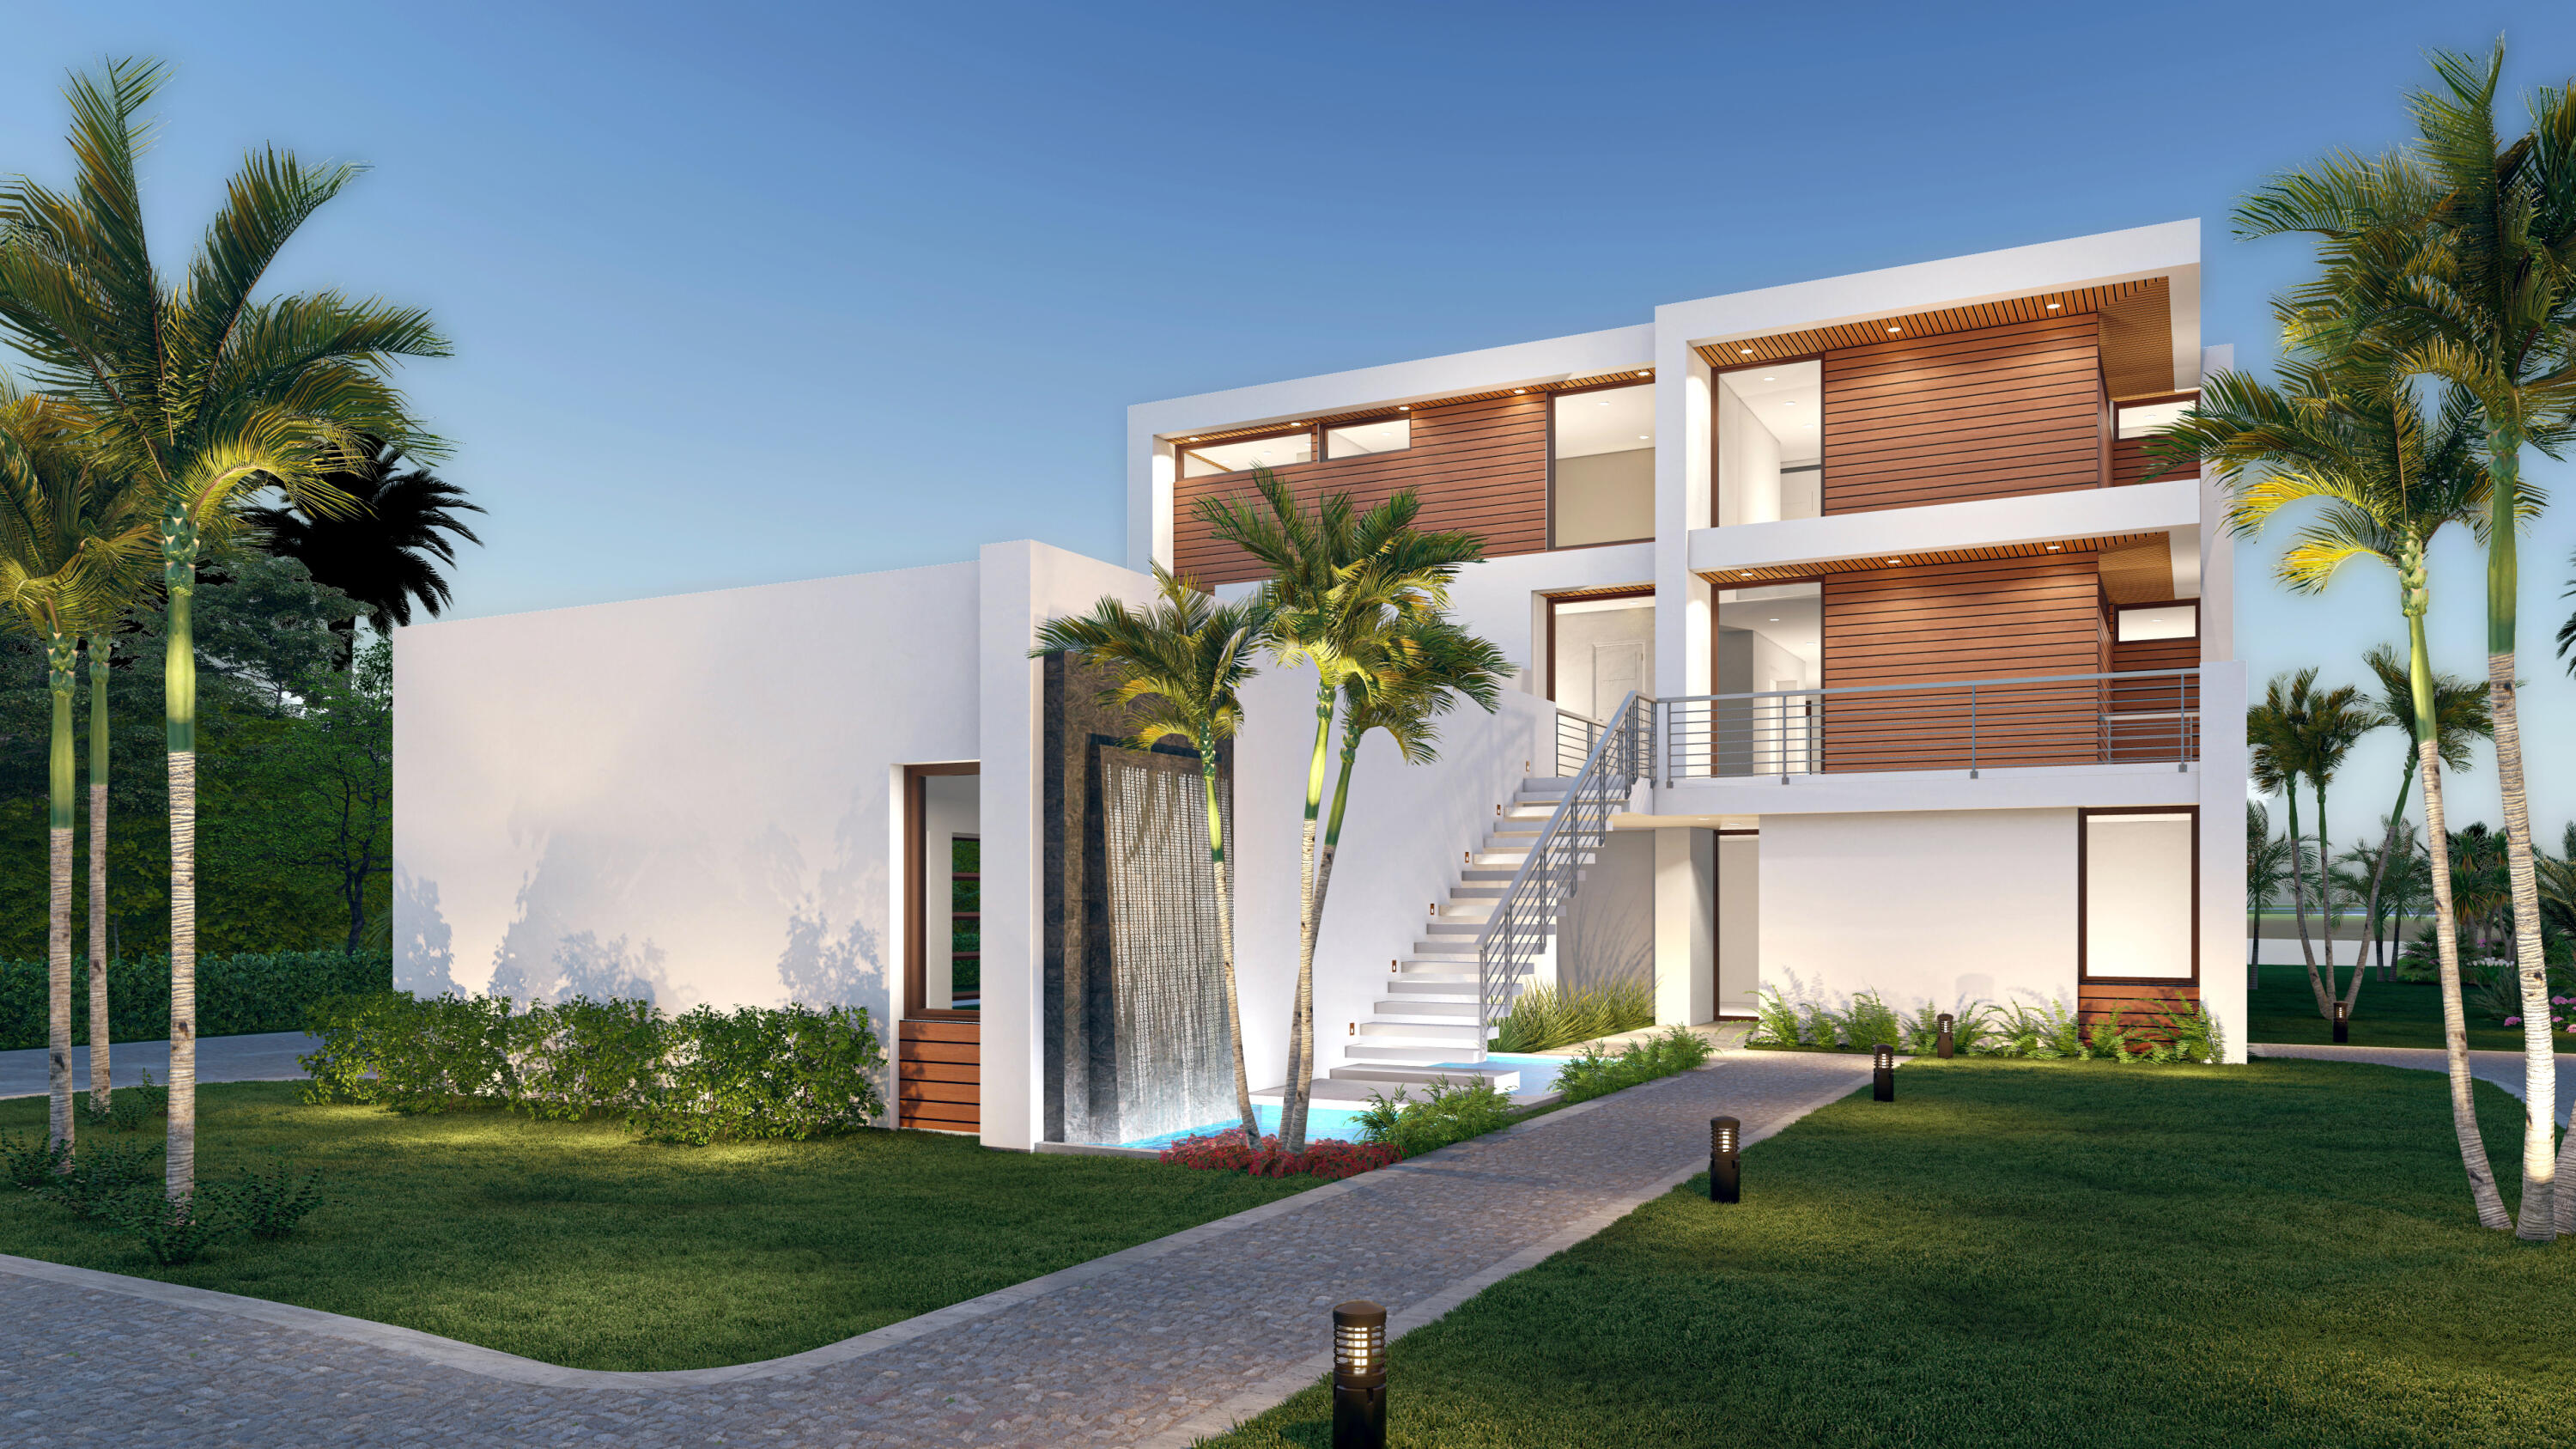 Don't miss out on this rare chance to own a brand-new, beachfront home. Sitting on a 0.67-acre lot with 100 feet of beachfront, this property offers breathtaking ocean views. The foundation and pilings for the first floor are already in place, and the home is set to be completed by the end of 2023. It comes with approved plans and permits, including a design for a 4-bedroom plus den layout, a pool, a three-car garage, and a golf cart garage. Enjoy private access to the beach and take in the stunning ocean views from your own slice of paradise.